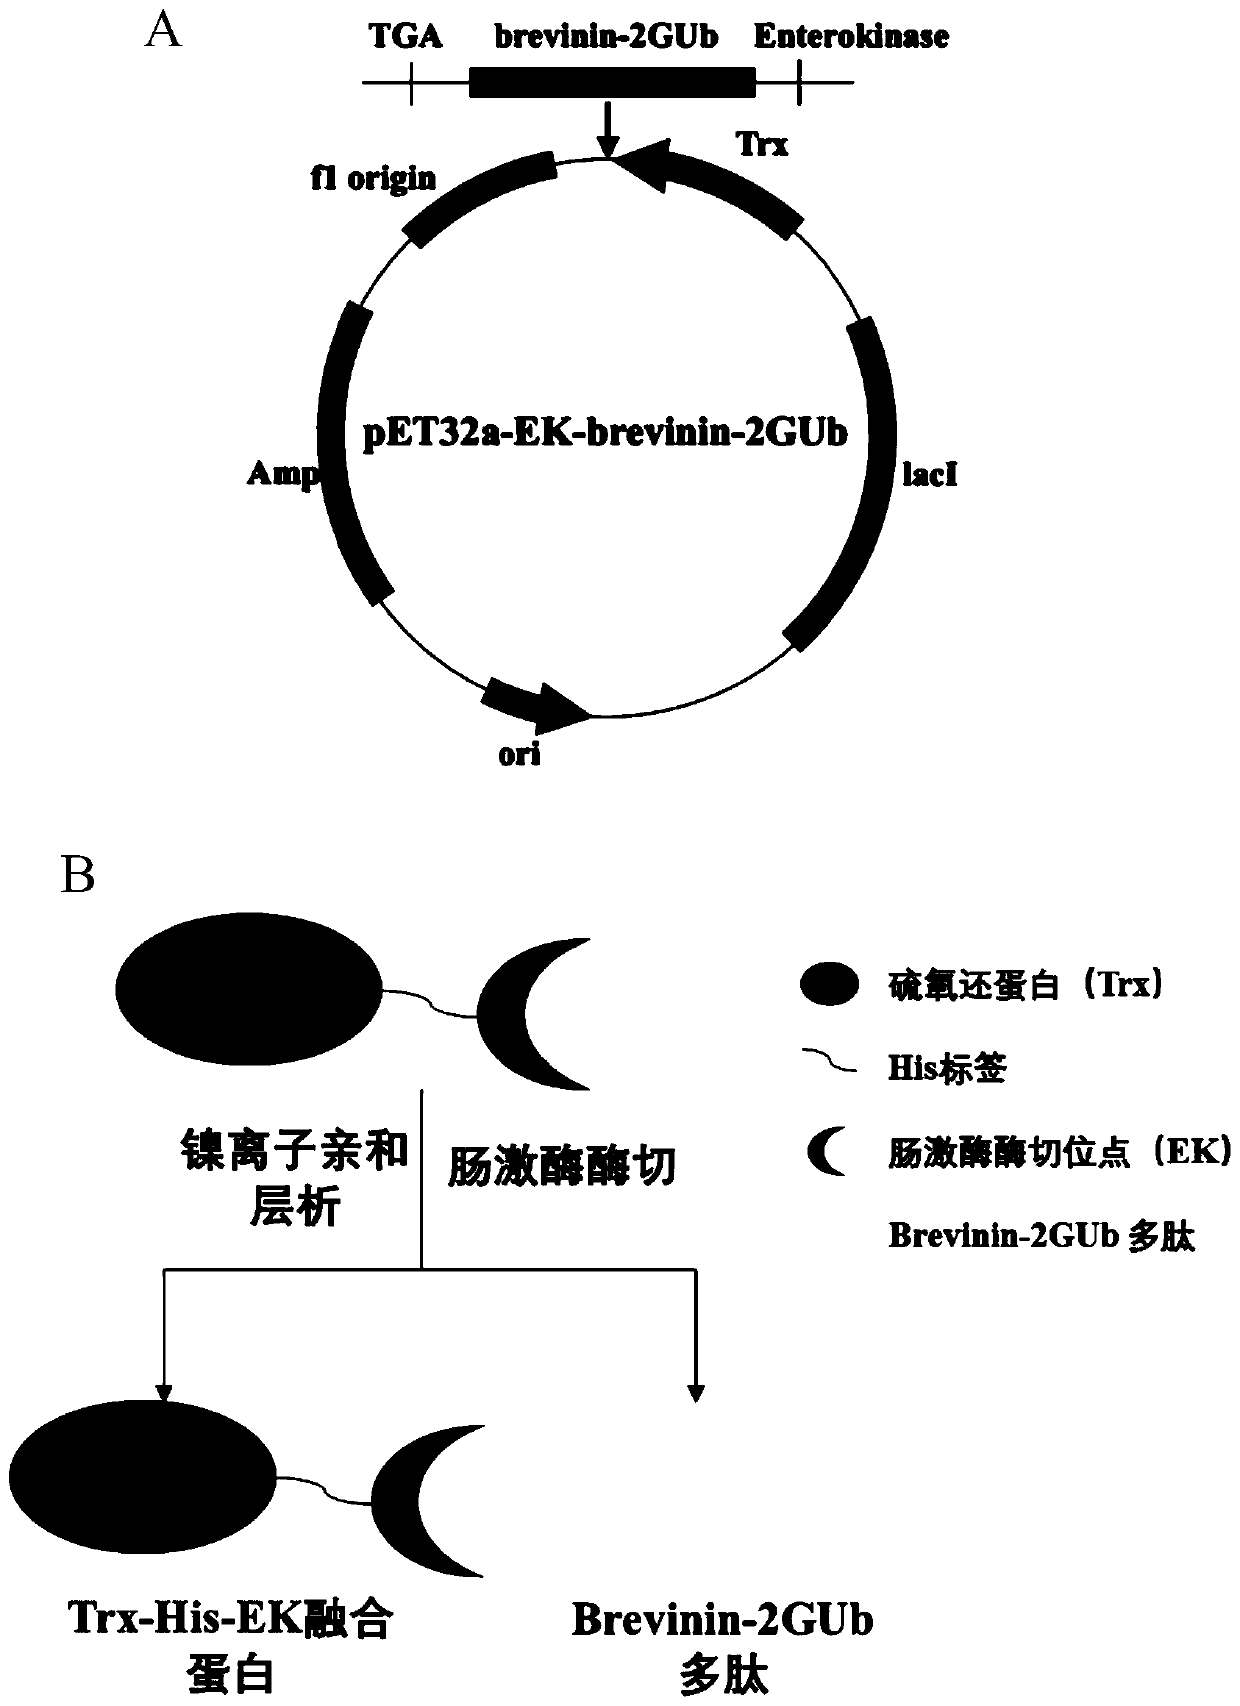 Recombinant expression method and application of Brevinin-2GUb polypeptide